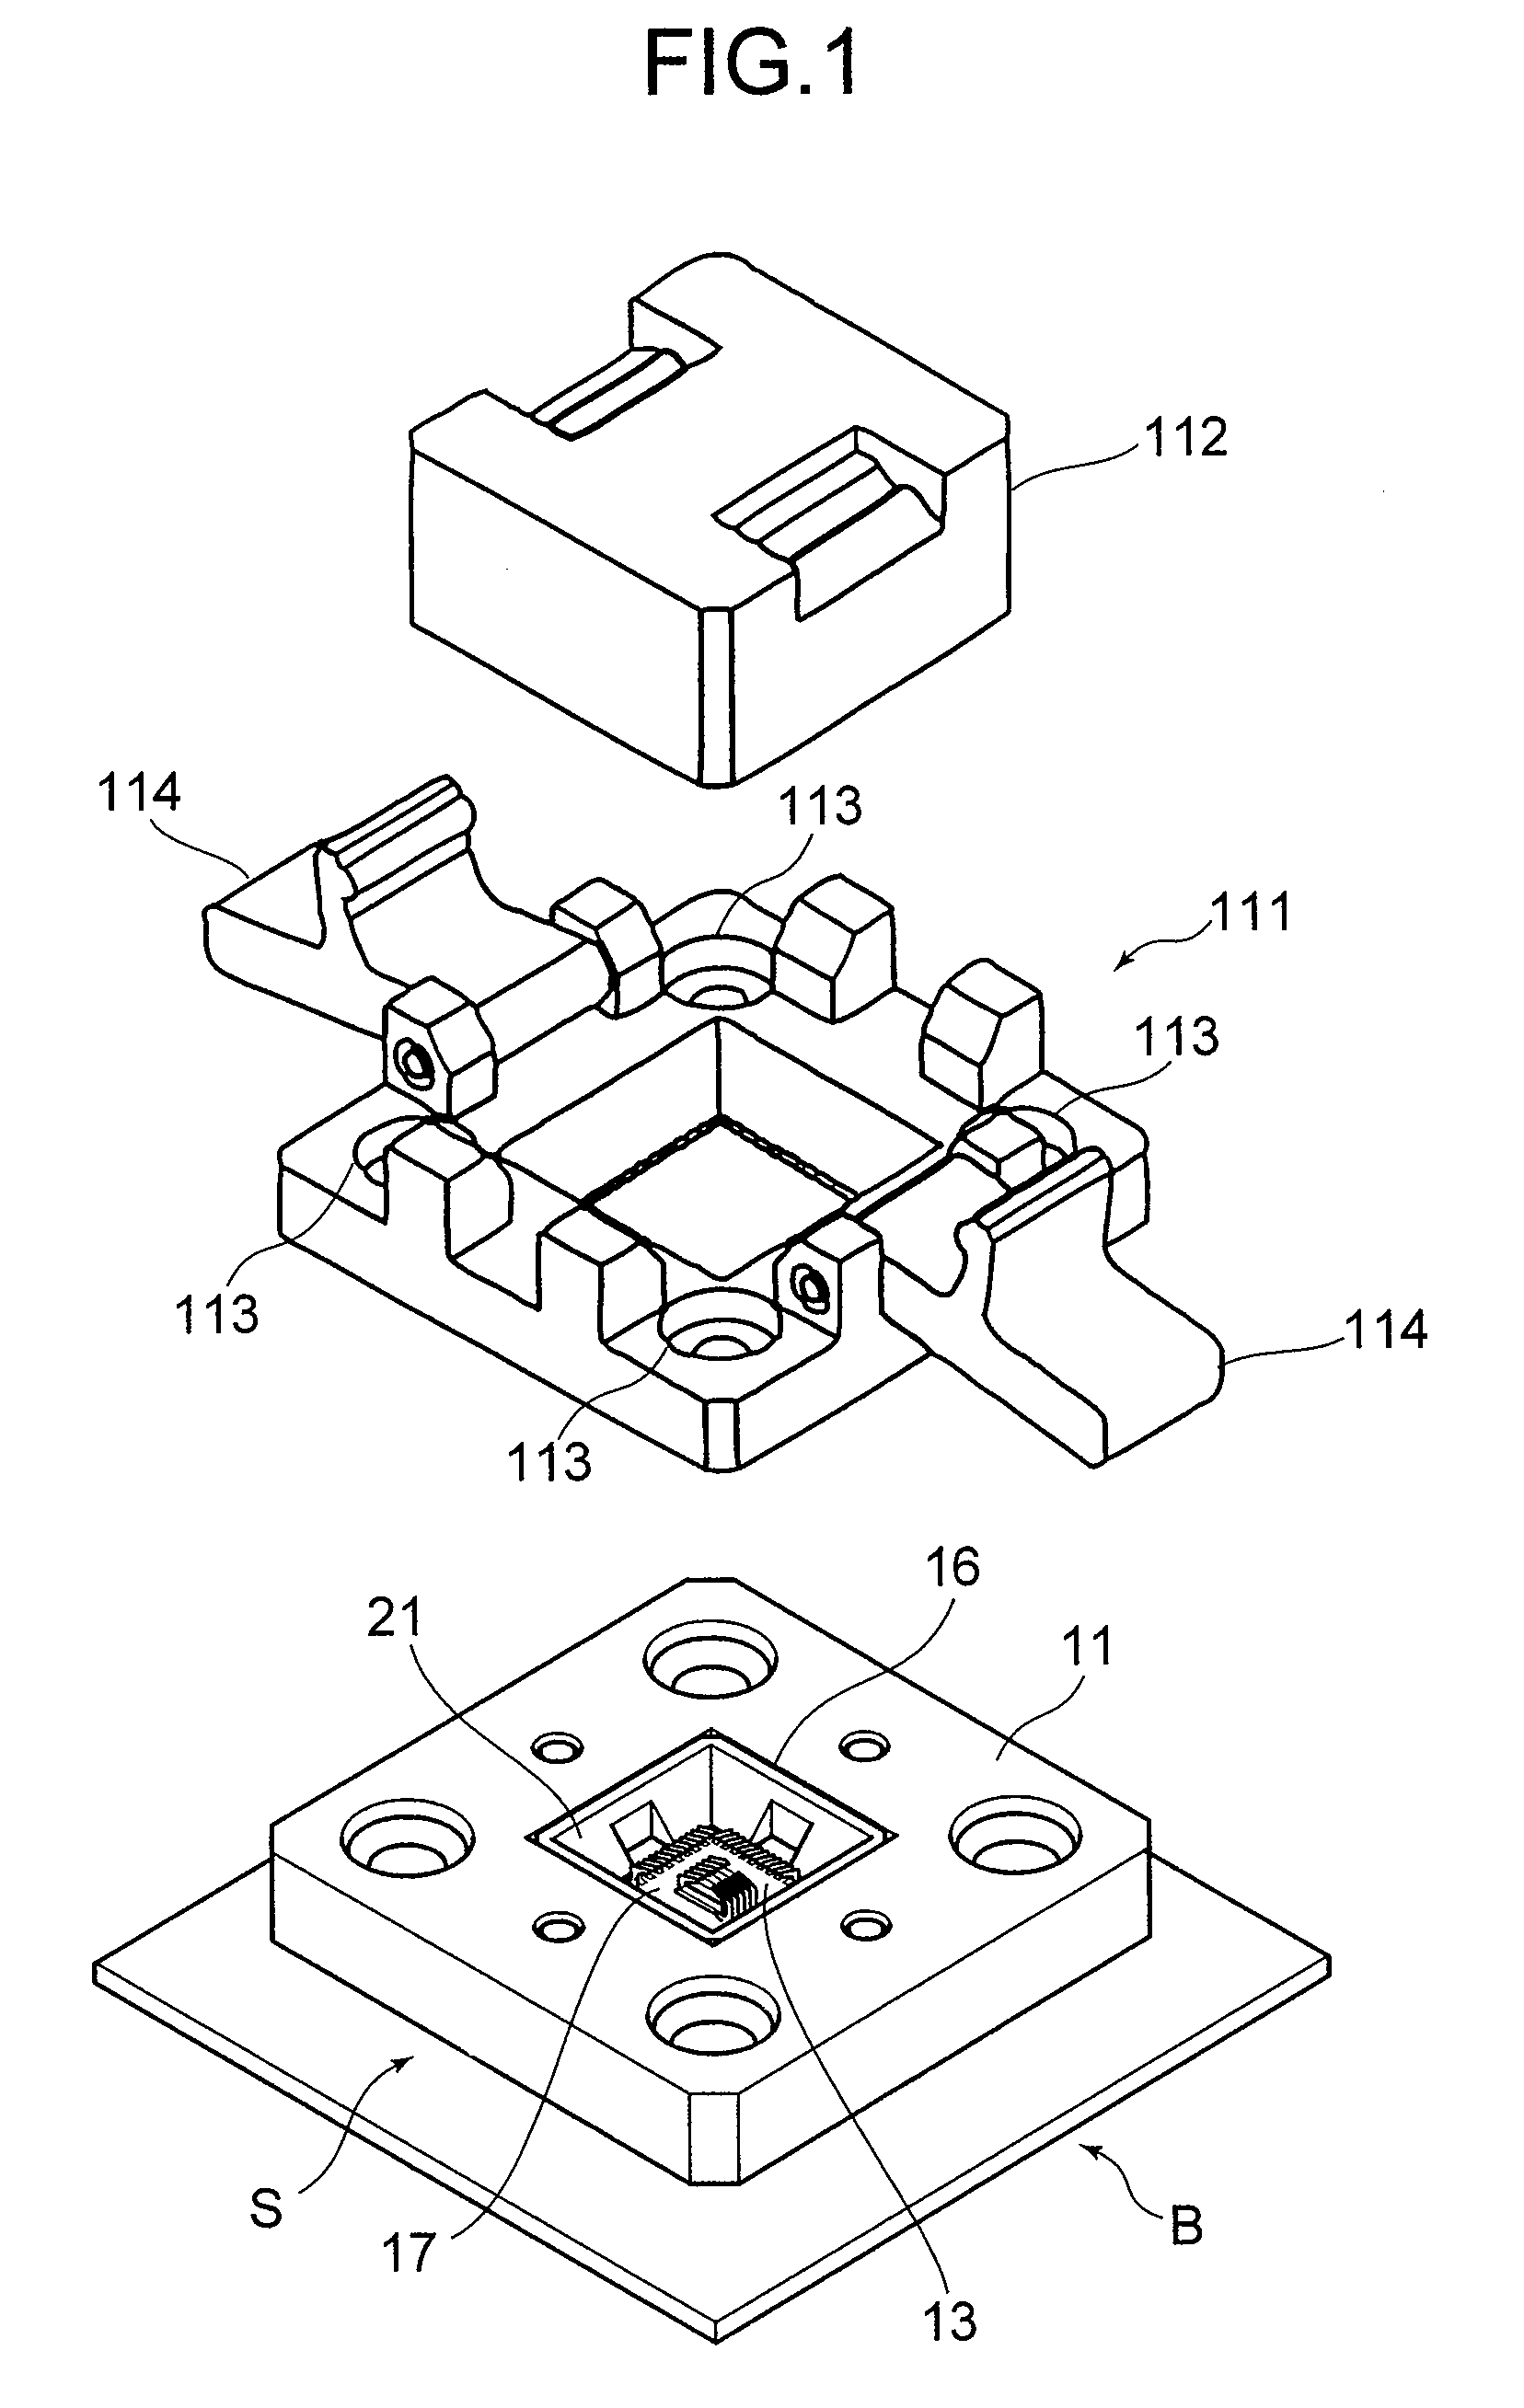 IC Socket to be Mounted on a Circuit Board